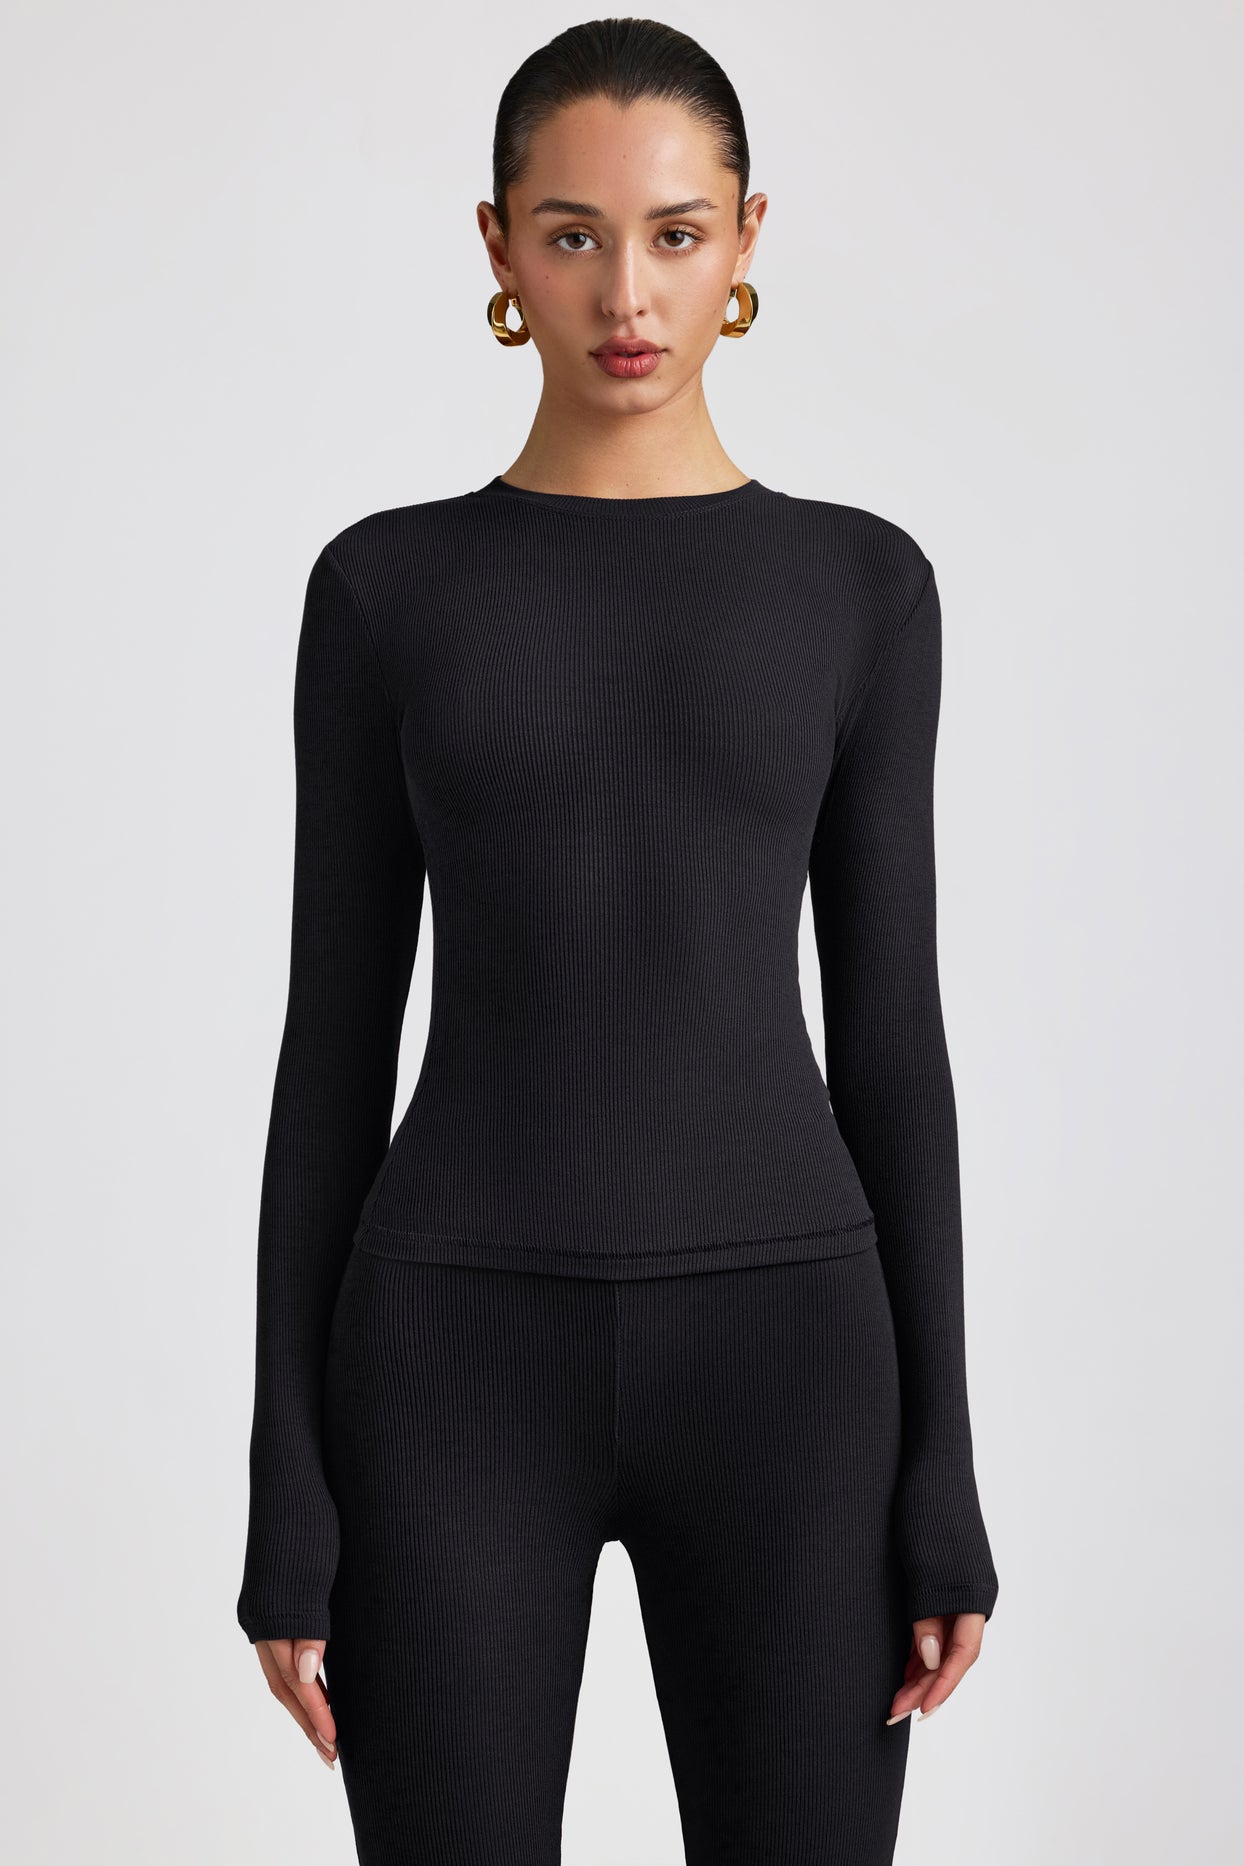 Clio Ribbed Modal Long Sleeve Crew Neck Top in Black | Oh Polly